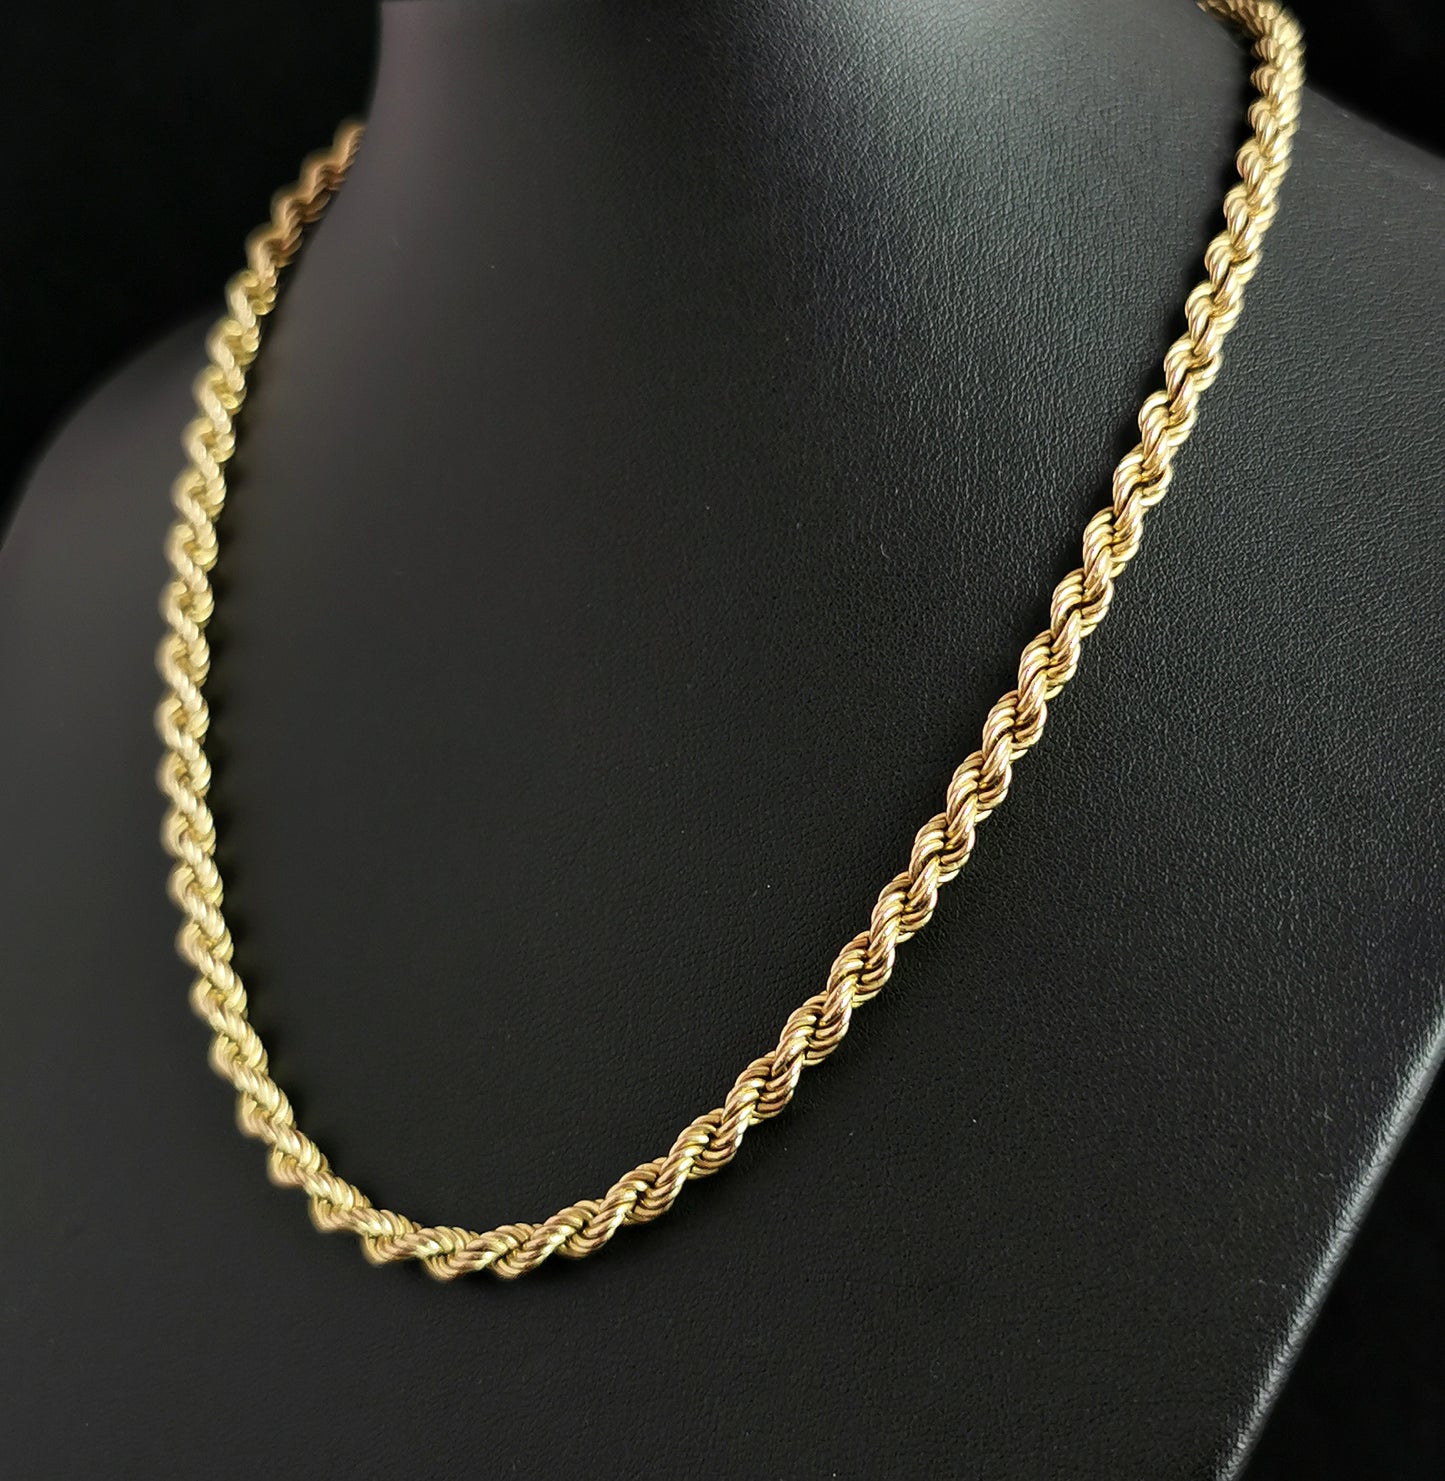 Vintage 9ct yellow gold Rope Chain necklace, Italian